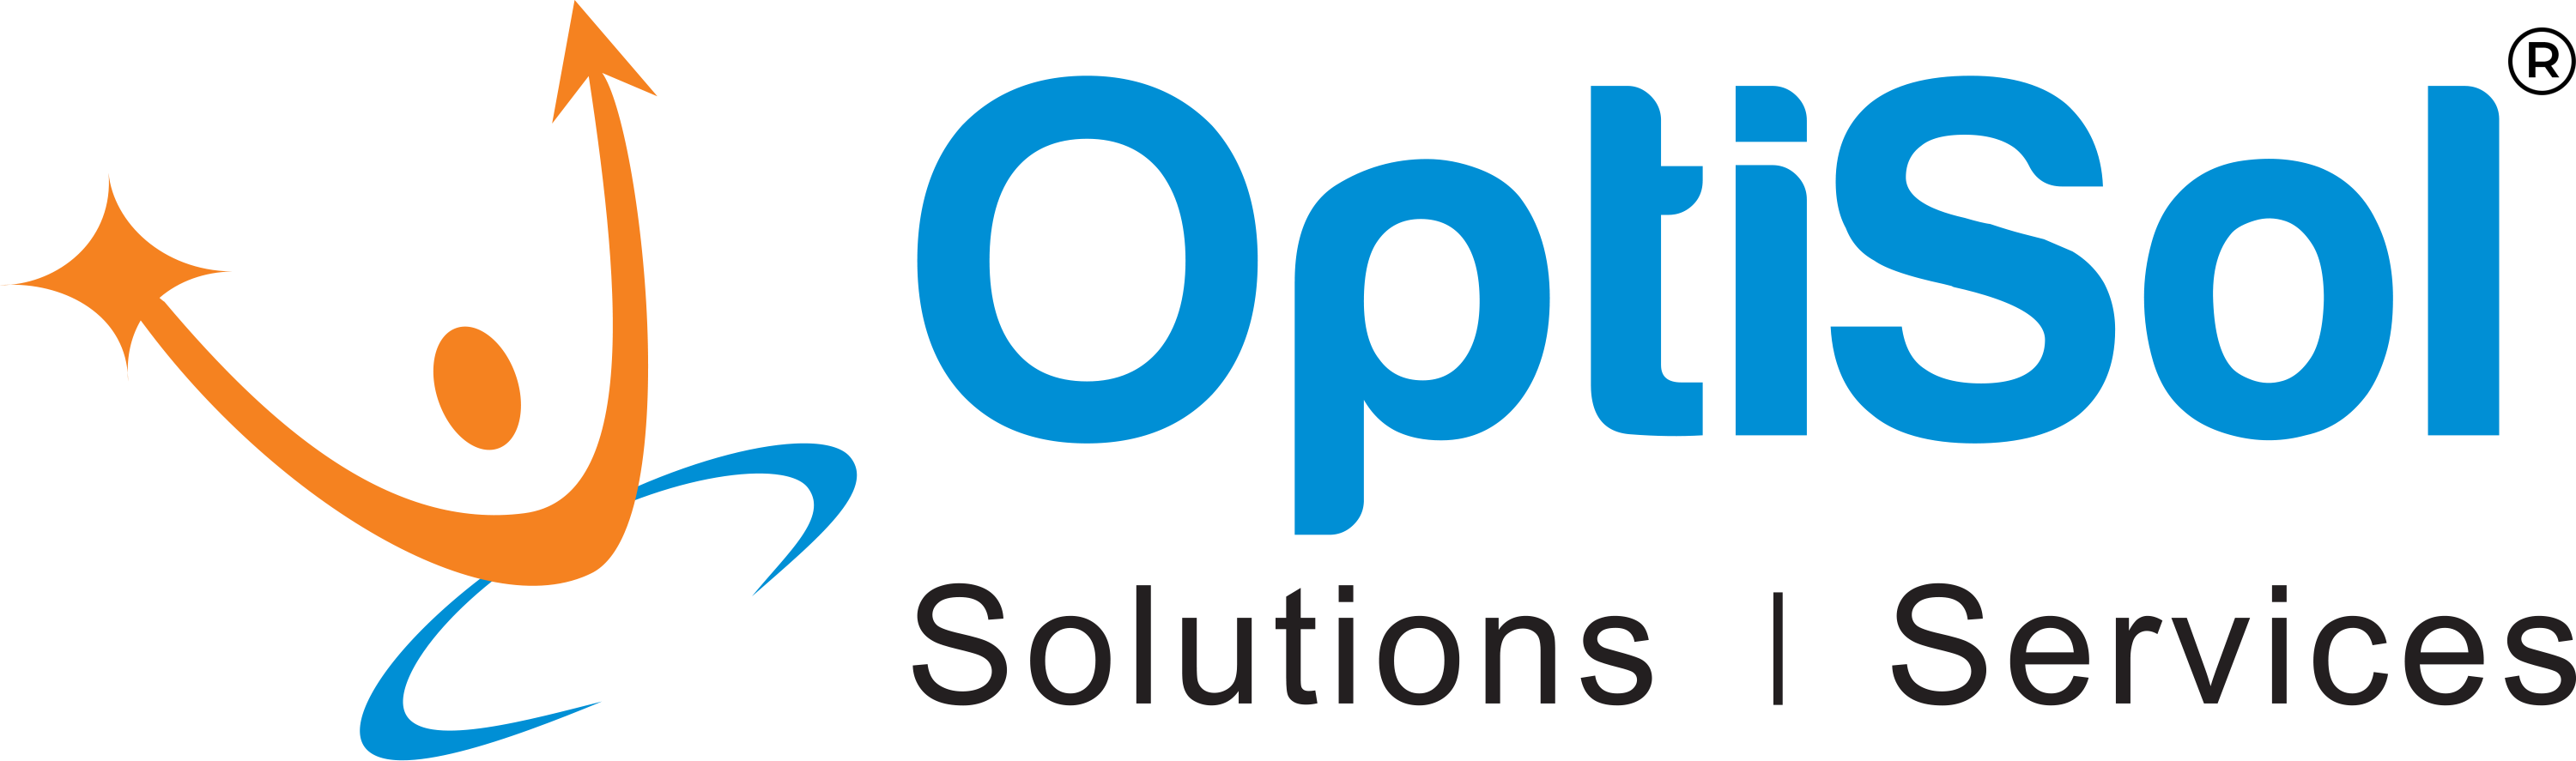 Images OptiSol - AI & Machine Learning Company | AWS Consulting Partner | Data Labeling Services